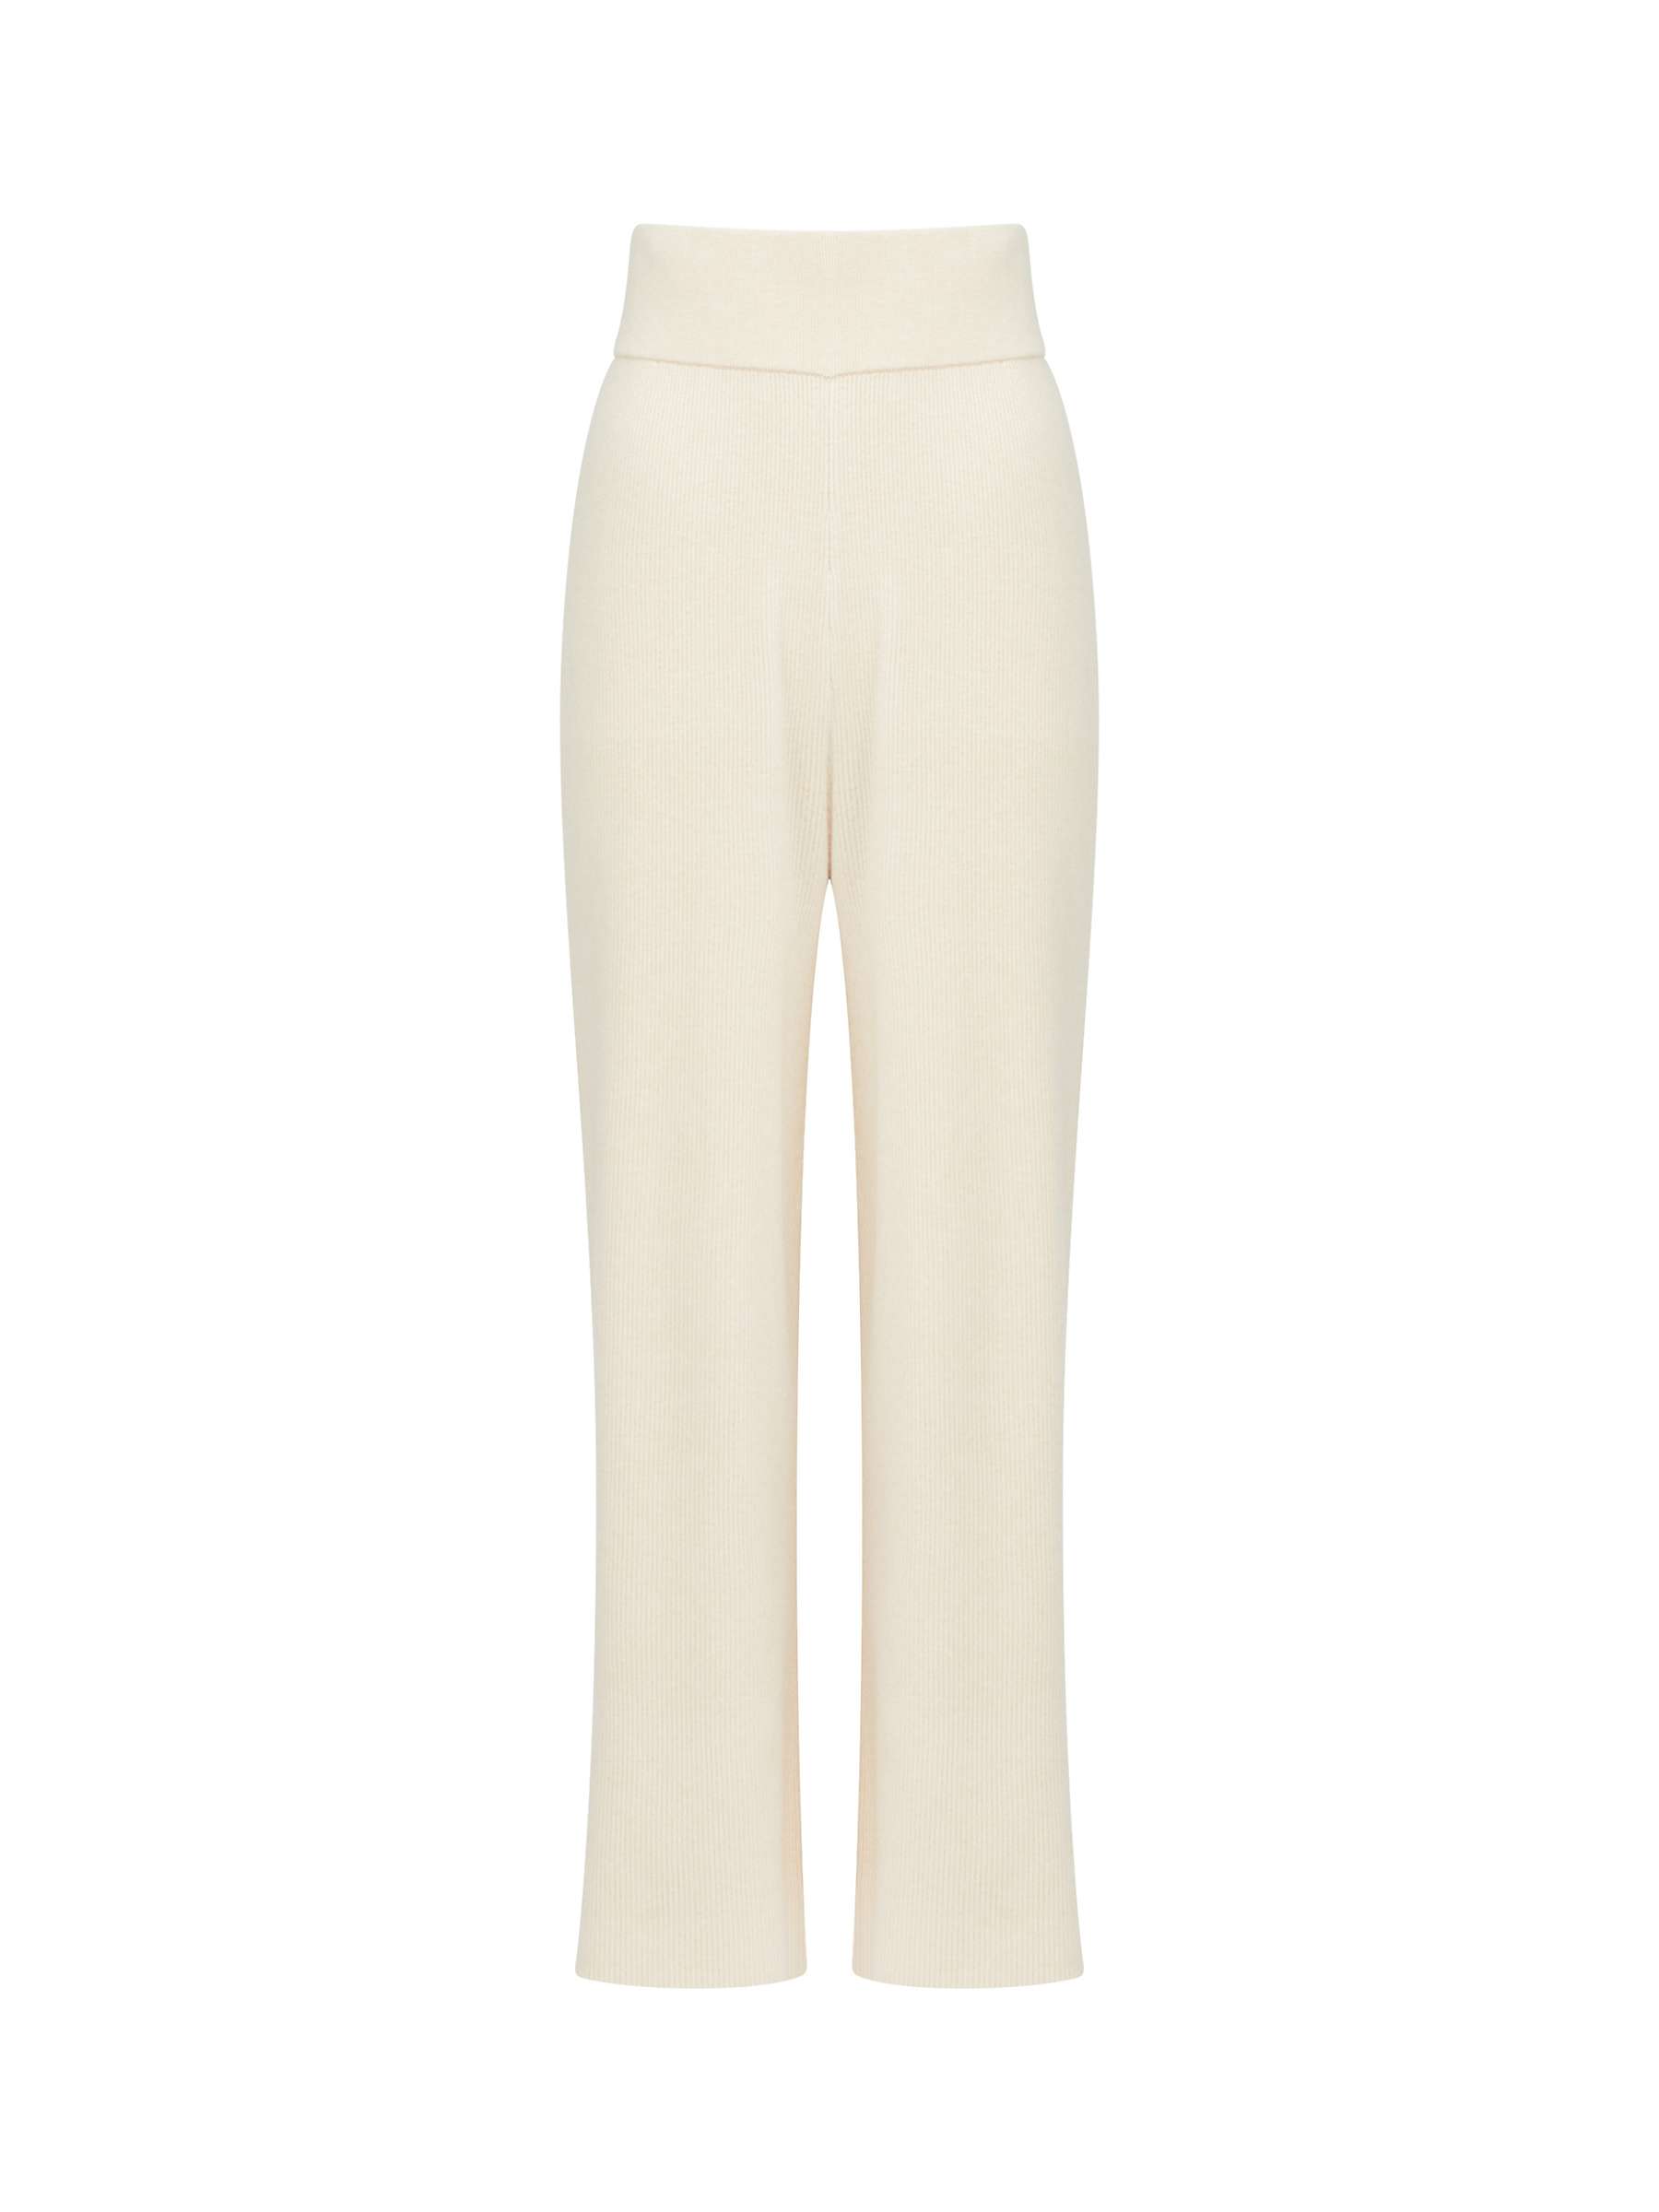 Buy Great Plains Winter Comfort Knit Trousers, Oyster Online at johnlewis.com